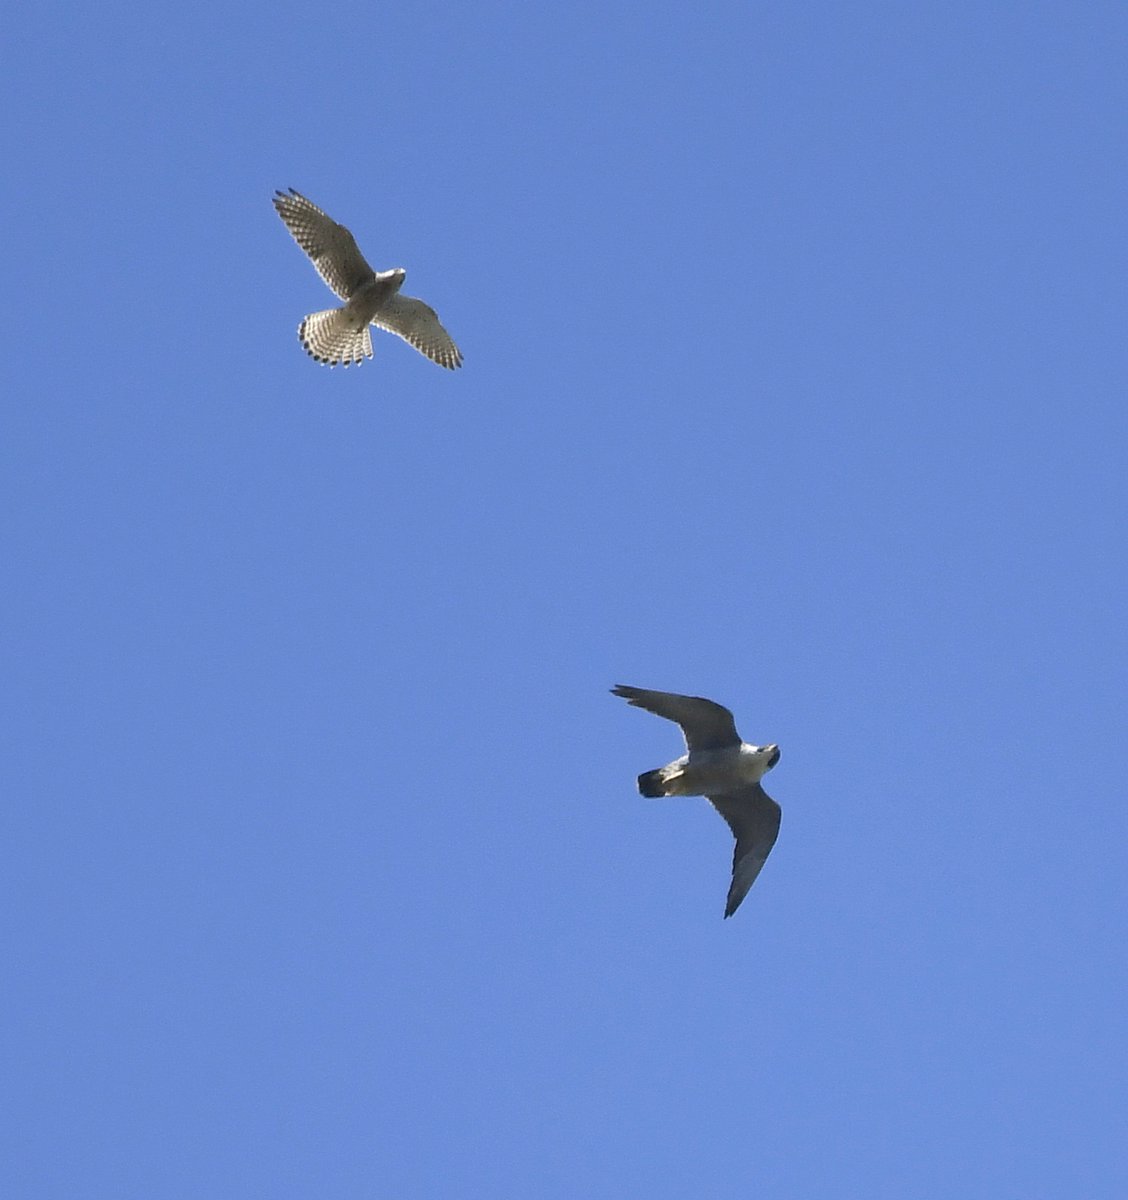 22 and 23. Peregrine Falcon & Kestrel Having a lazy moment laying on my swing-seat looking at the sky yesterday, when I saw this drama playing out between Falcons, very high above! The Kestrel (smaller bird) kept mobbing the Peregrine! Wonderful! #LockdownGardenBirdsSeen 